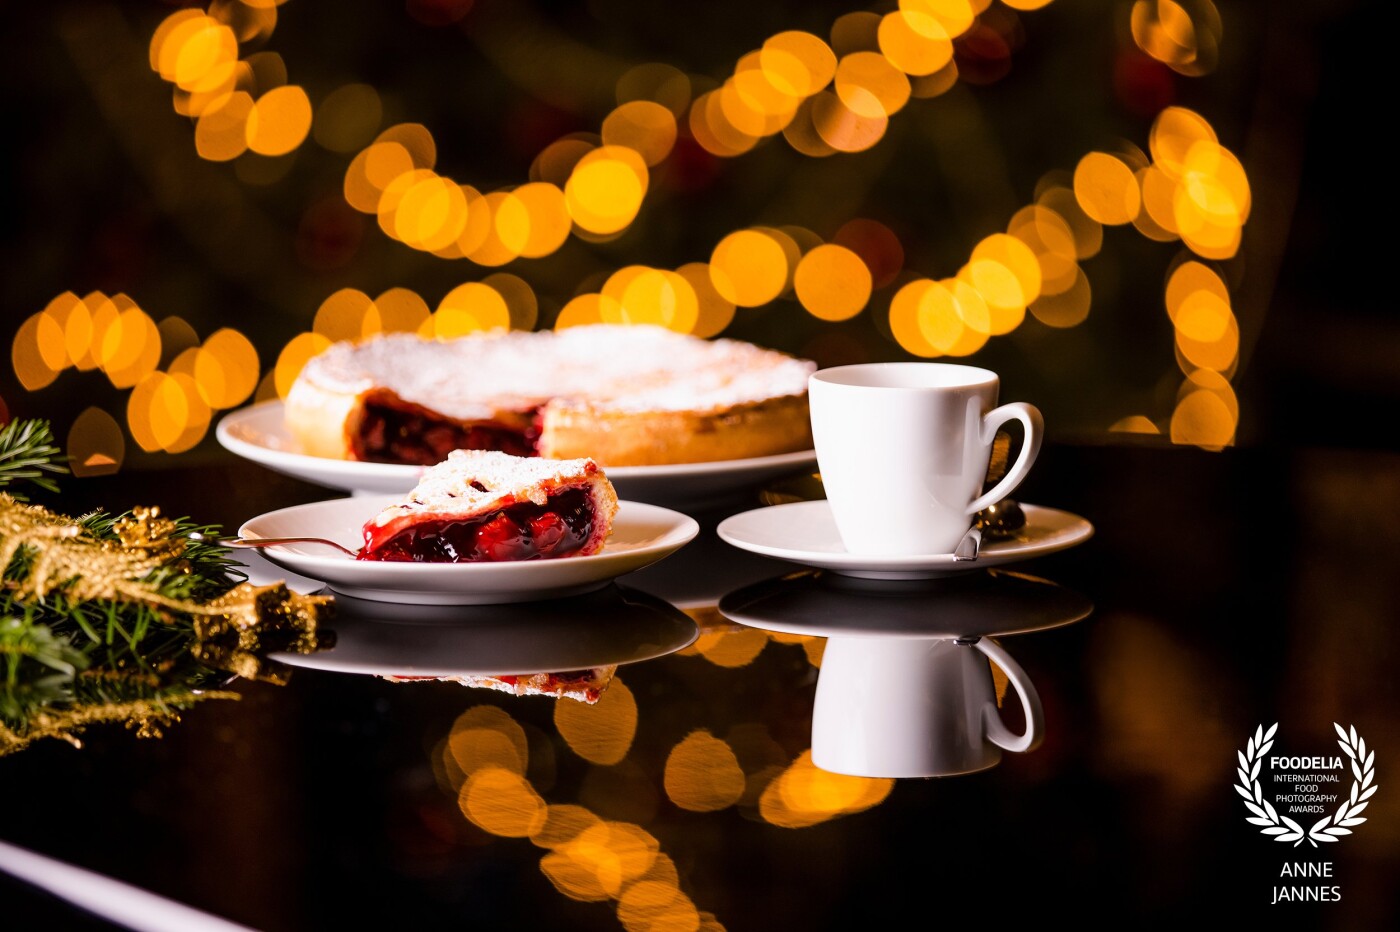 This image was shot for Oostwegel Collection. They serve amazing pie. Because of a Christmas deal I tried to add the feeling of Christmas by adding bokeh. Here you can see the cherry pie with a hot coffee.